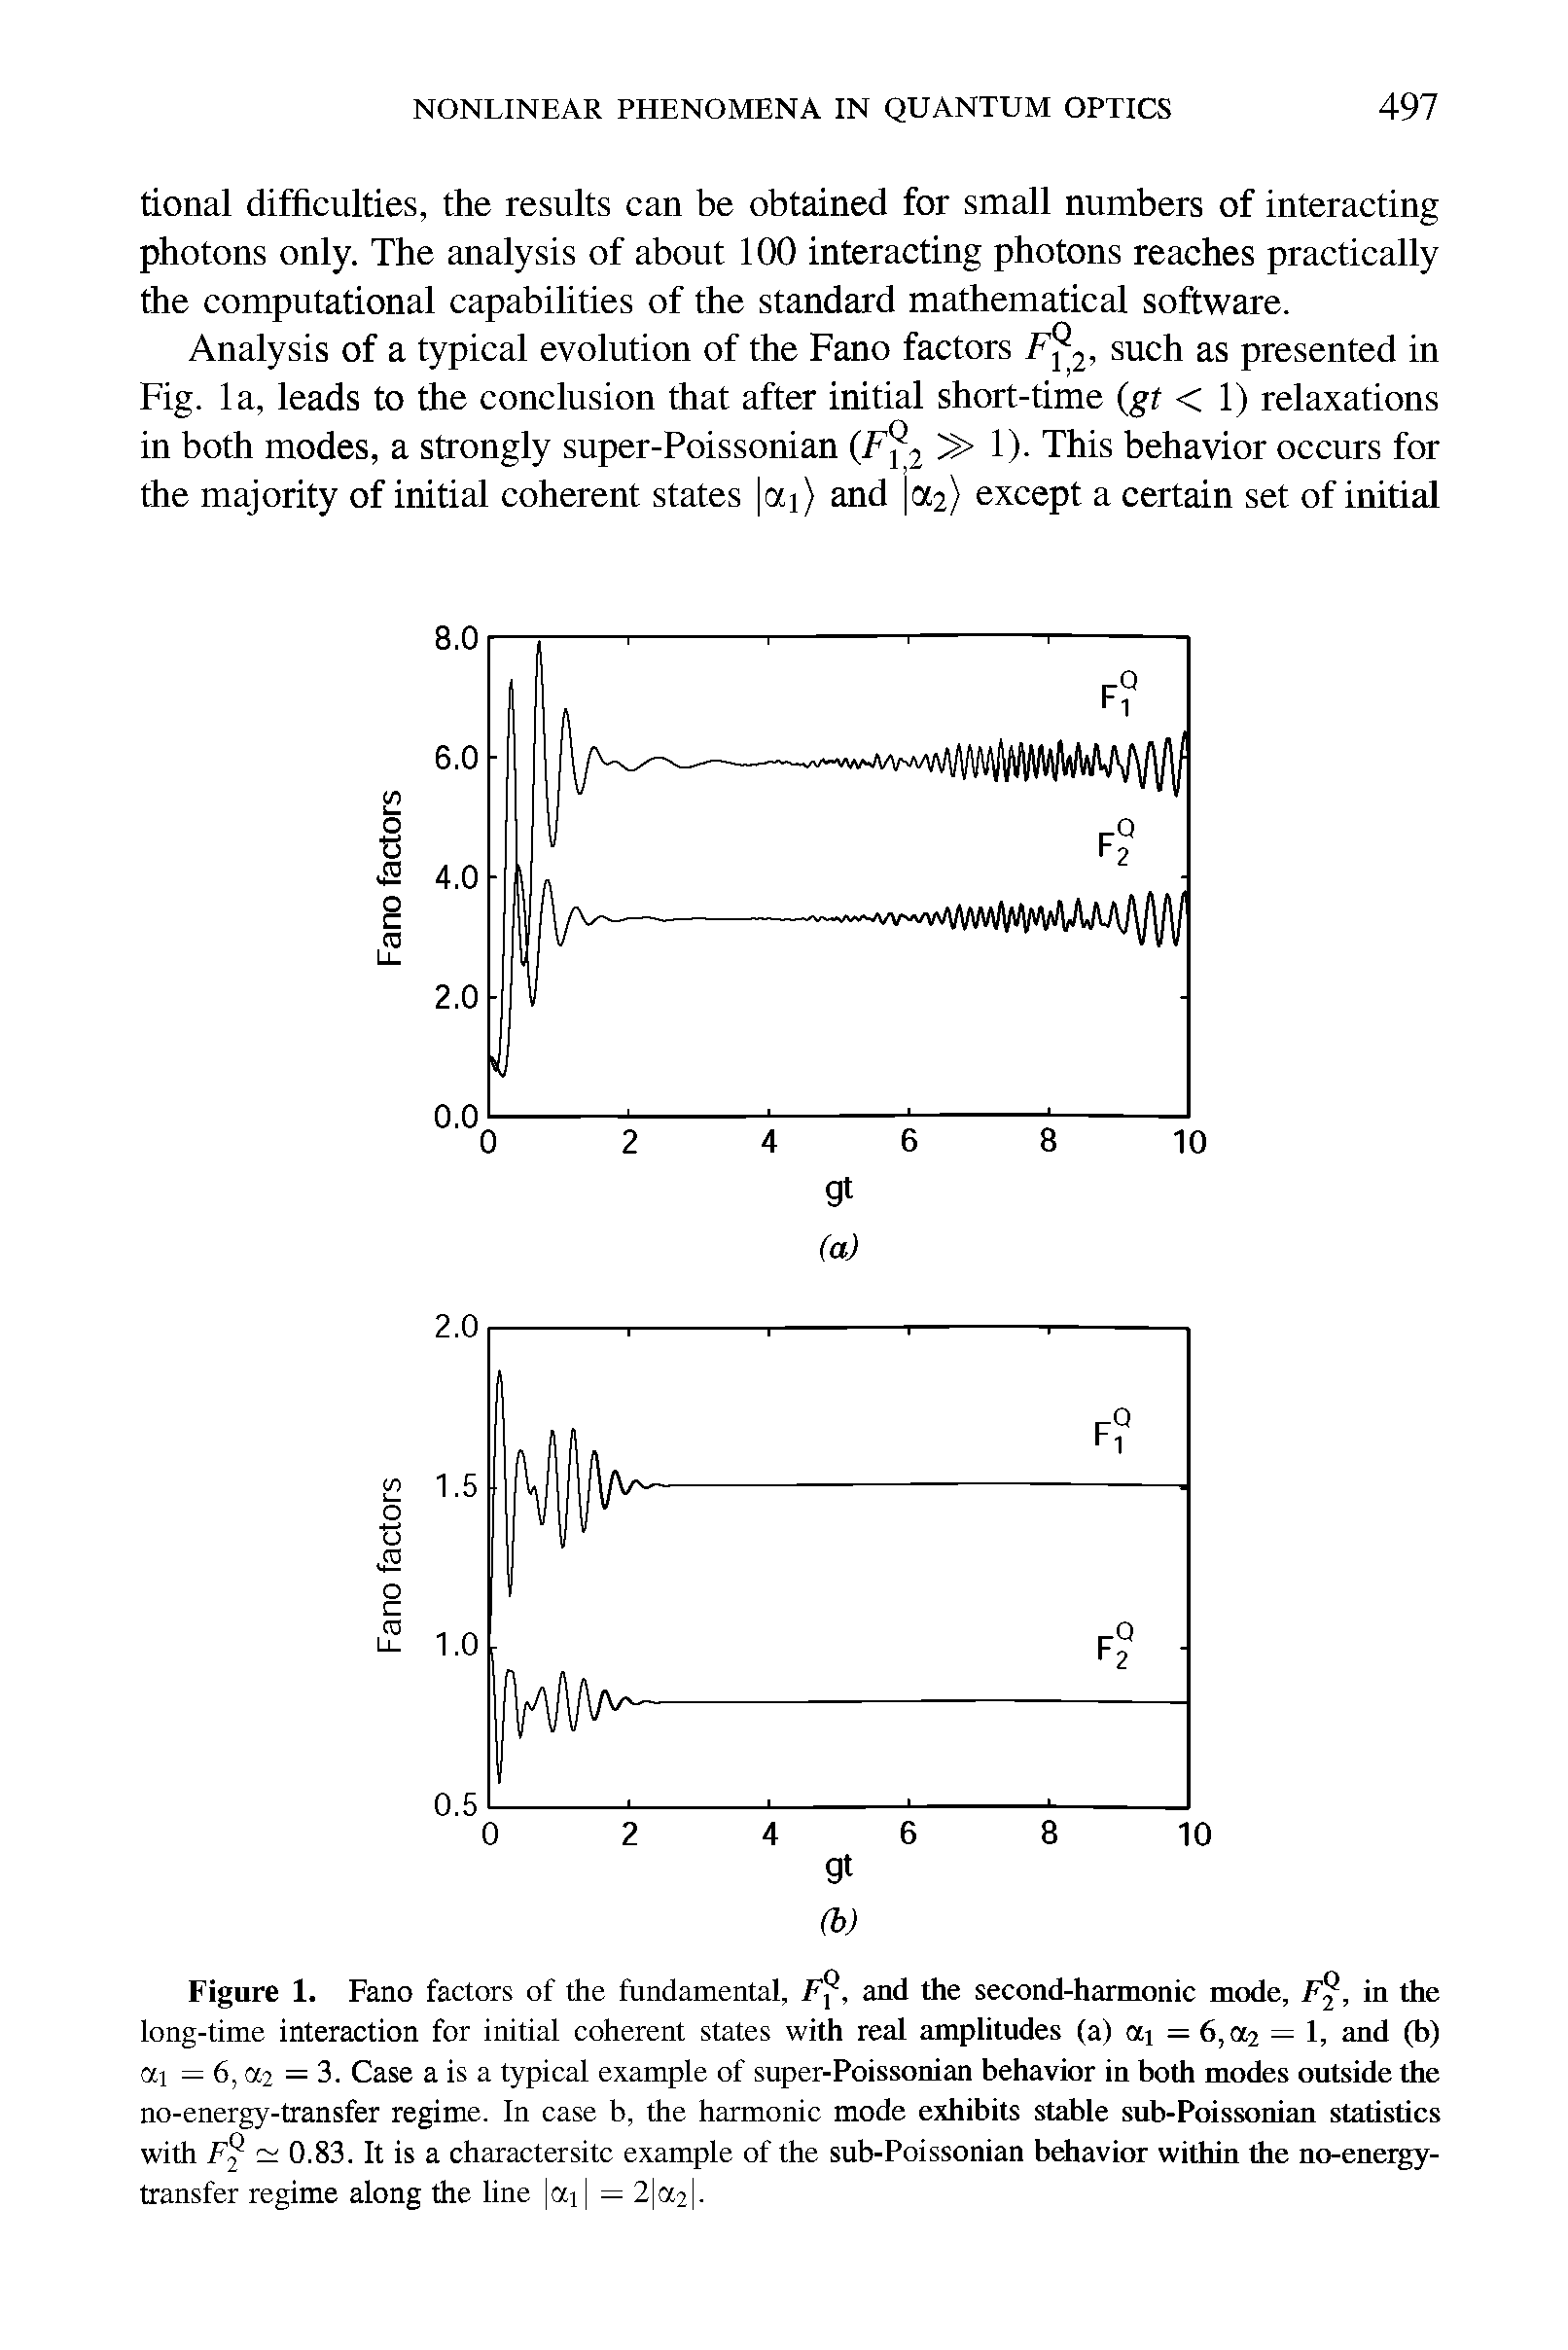 Figure 1. Fano factors of the fundamental, Ff, and the second-harmonic mode, / V. in the long-time interaction for initial coherent states with real amplitudes (a) ai = 6,0C2 — 1, and (b) ai — 6,0C2 = 3. Case a is a typical example of super-Poissonian behavior in both modes outside the no-energy-transfer regime. In case b, the harmonic mode exhibits stable sub-Poissonian statistics with F — 0.83. It is a charactersitc example of the sub-Poissonian behavior within the no-energy-transfer regime along the line ai = 2 ct21-...